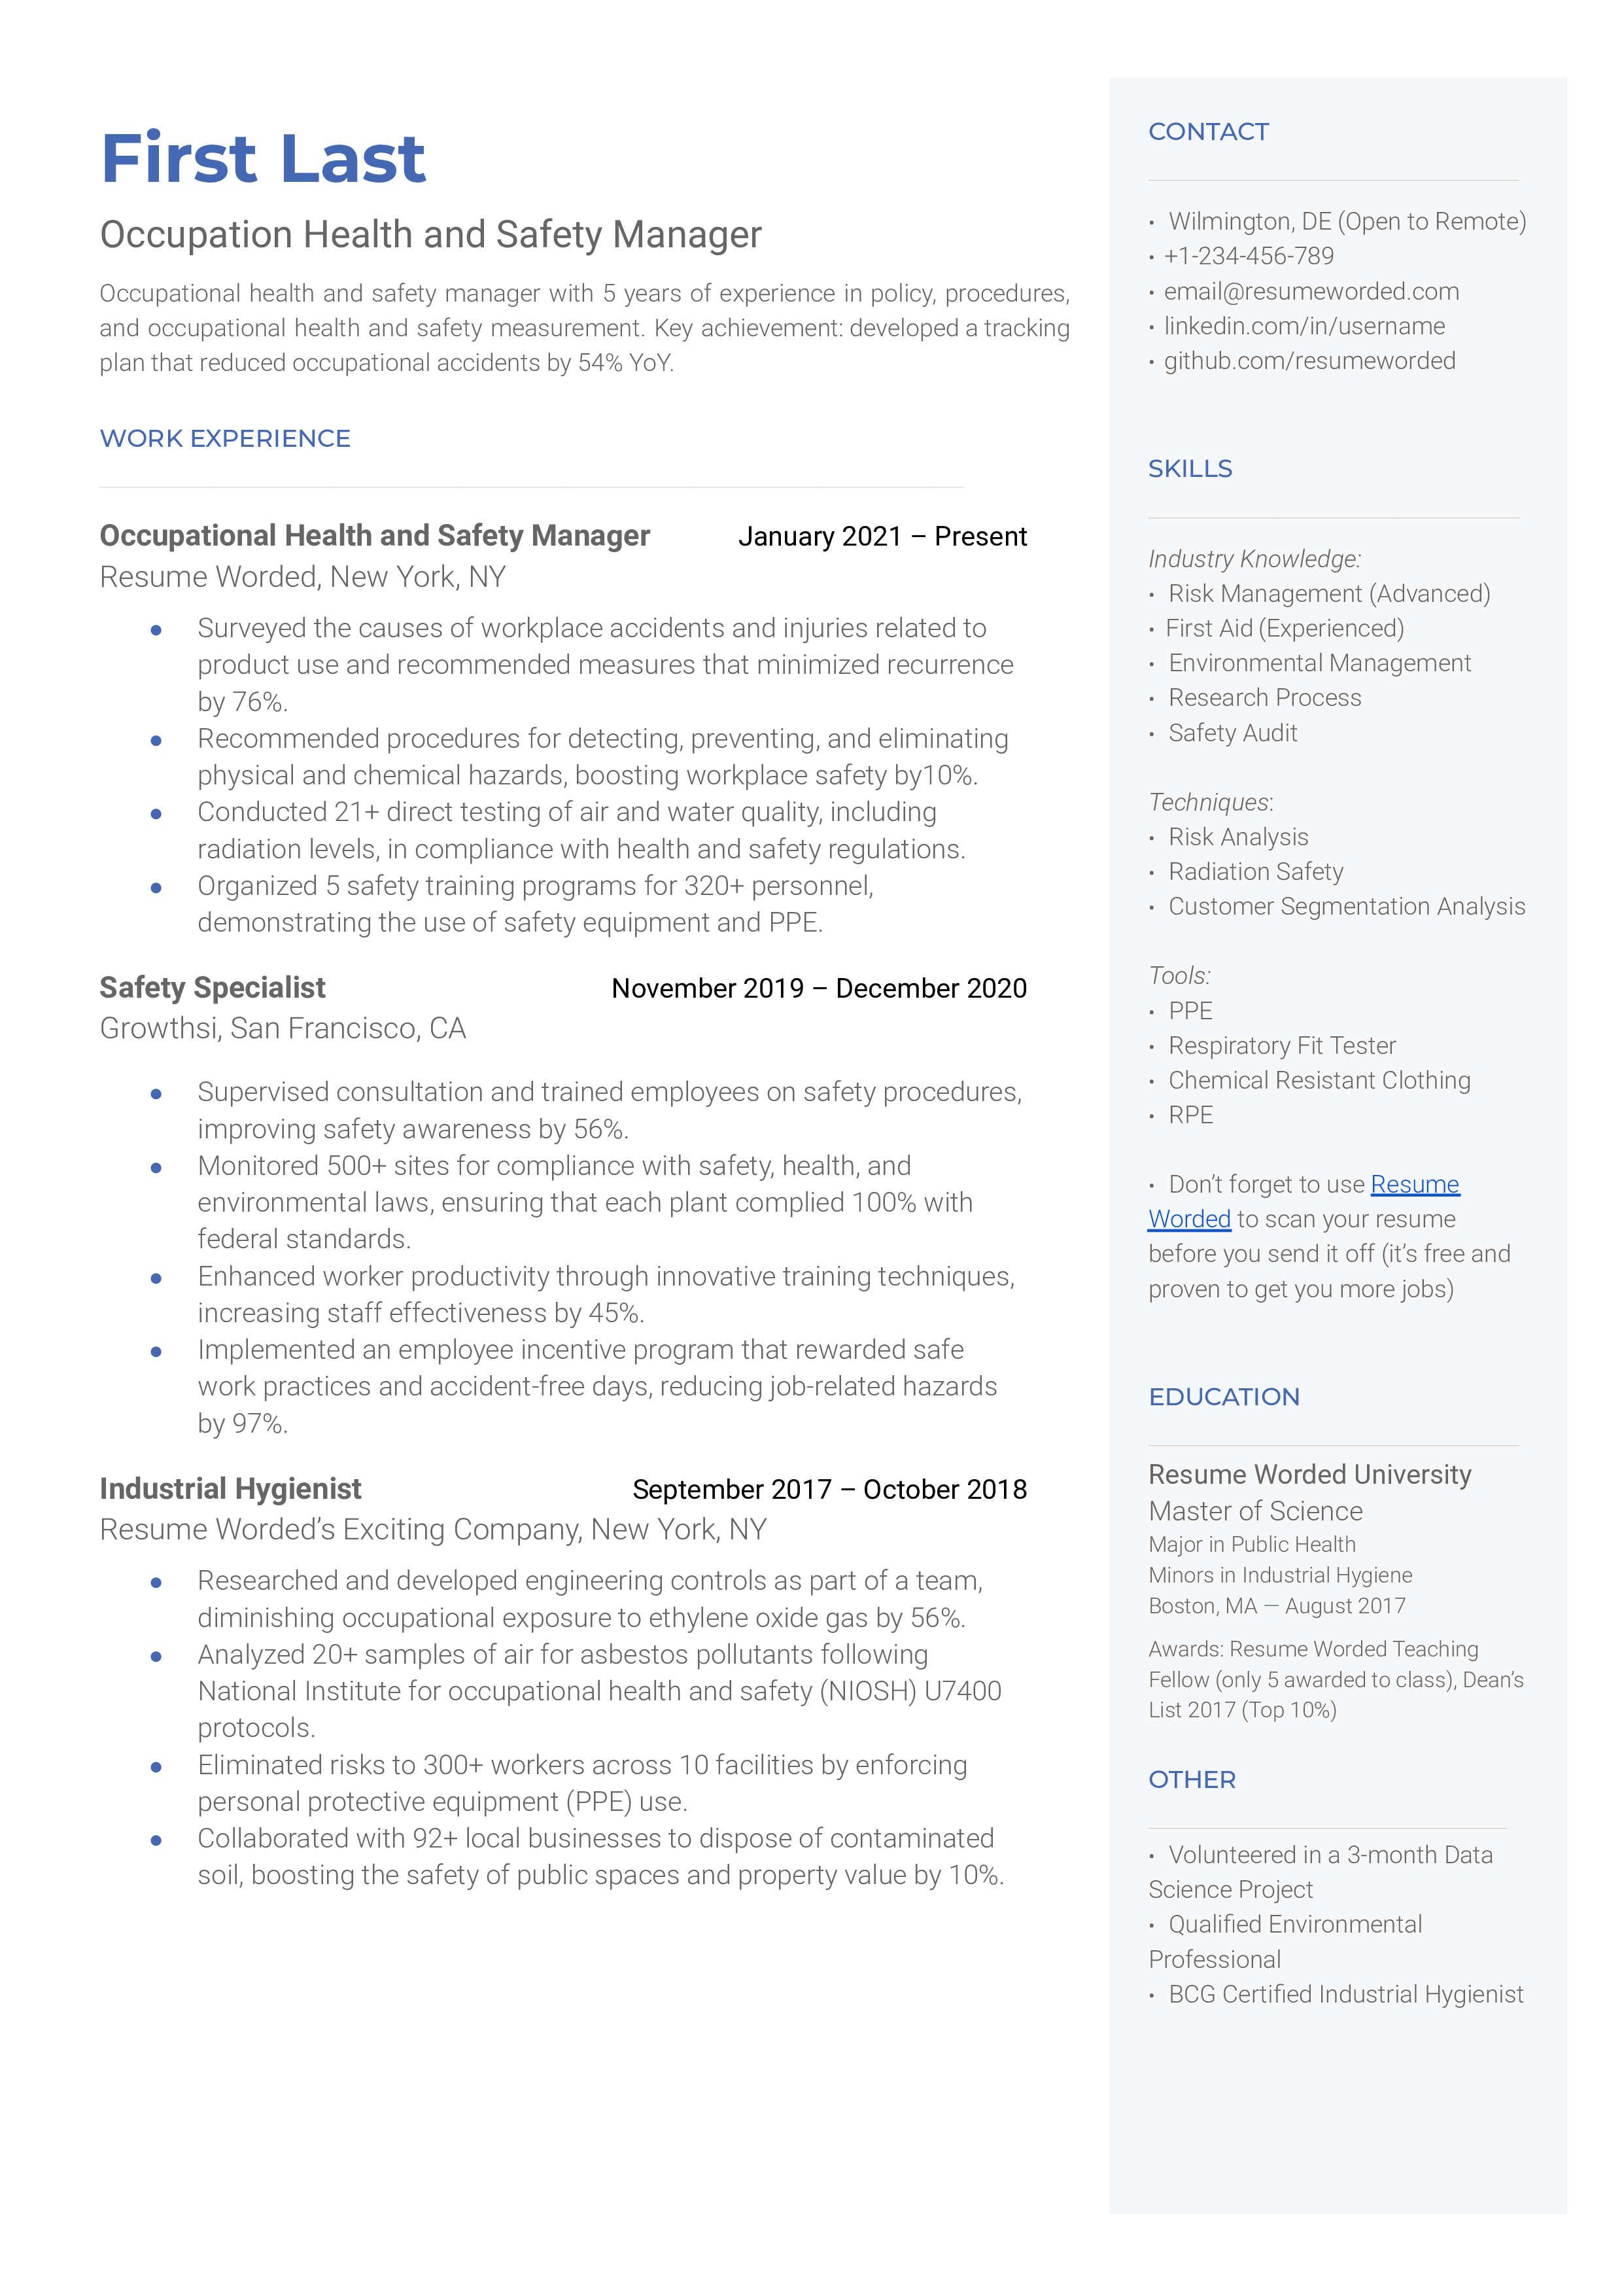 Occupational Health and Safety Manager Resume Sample